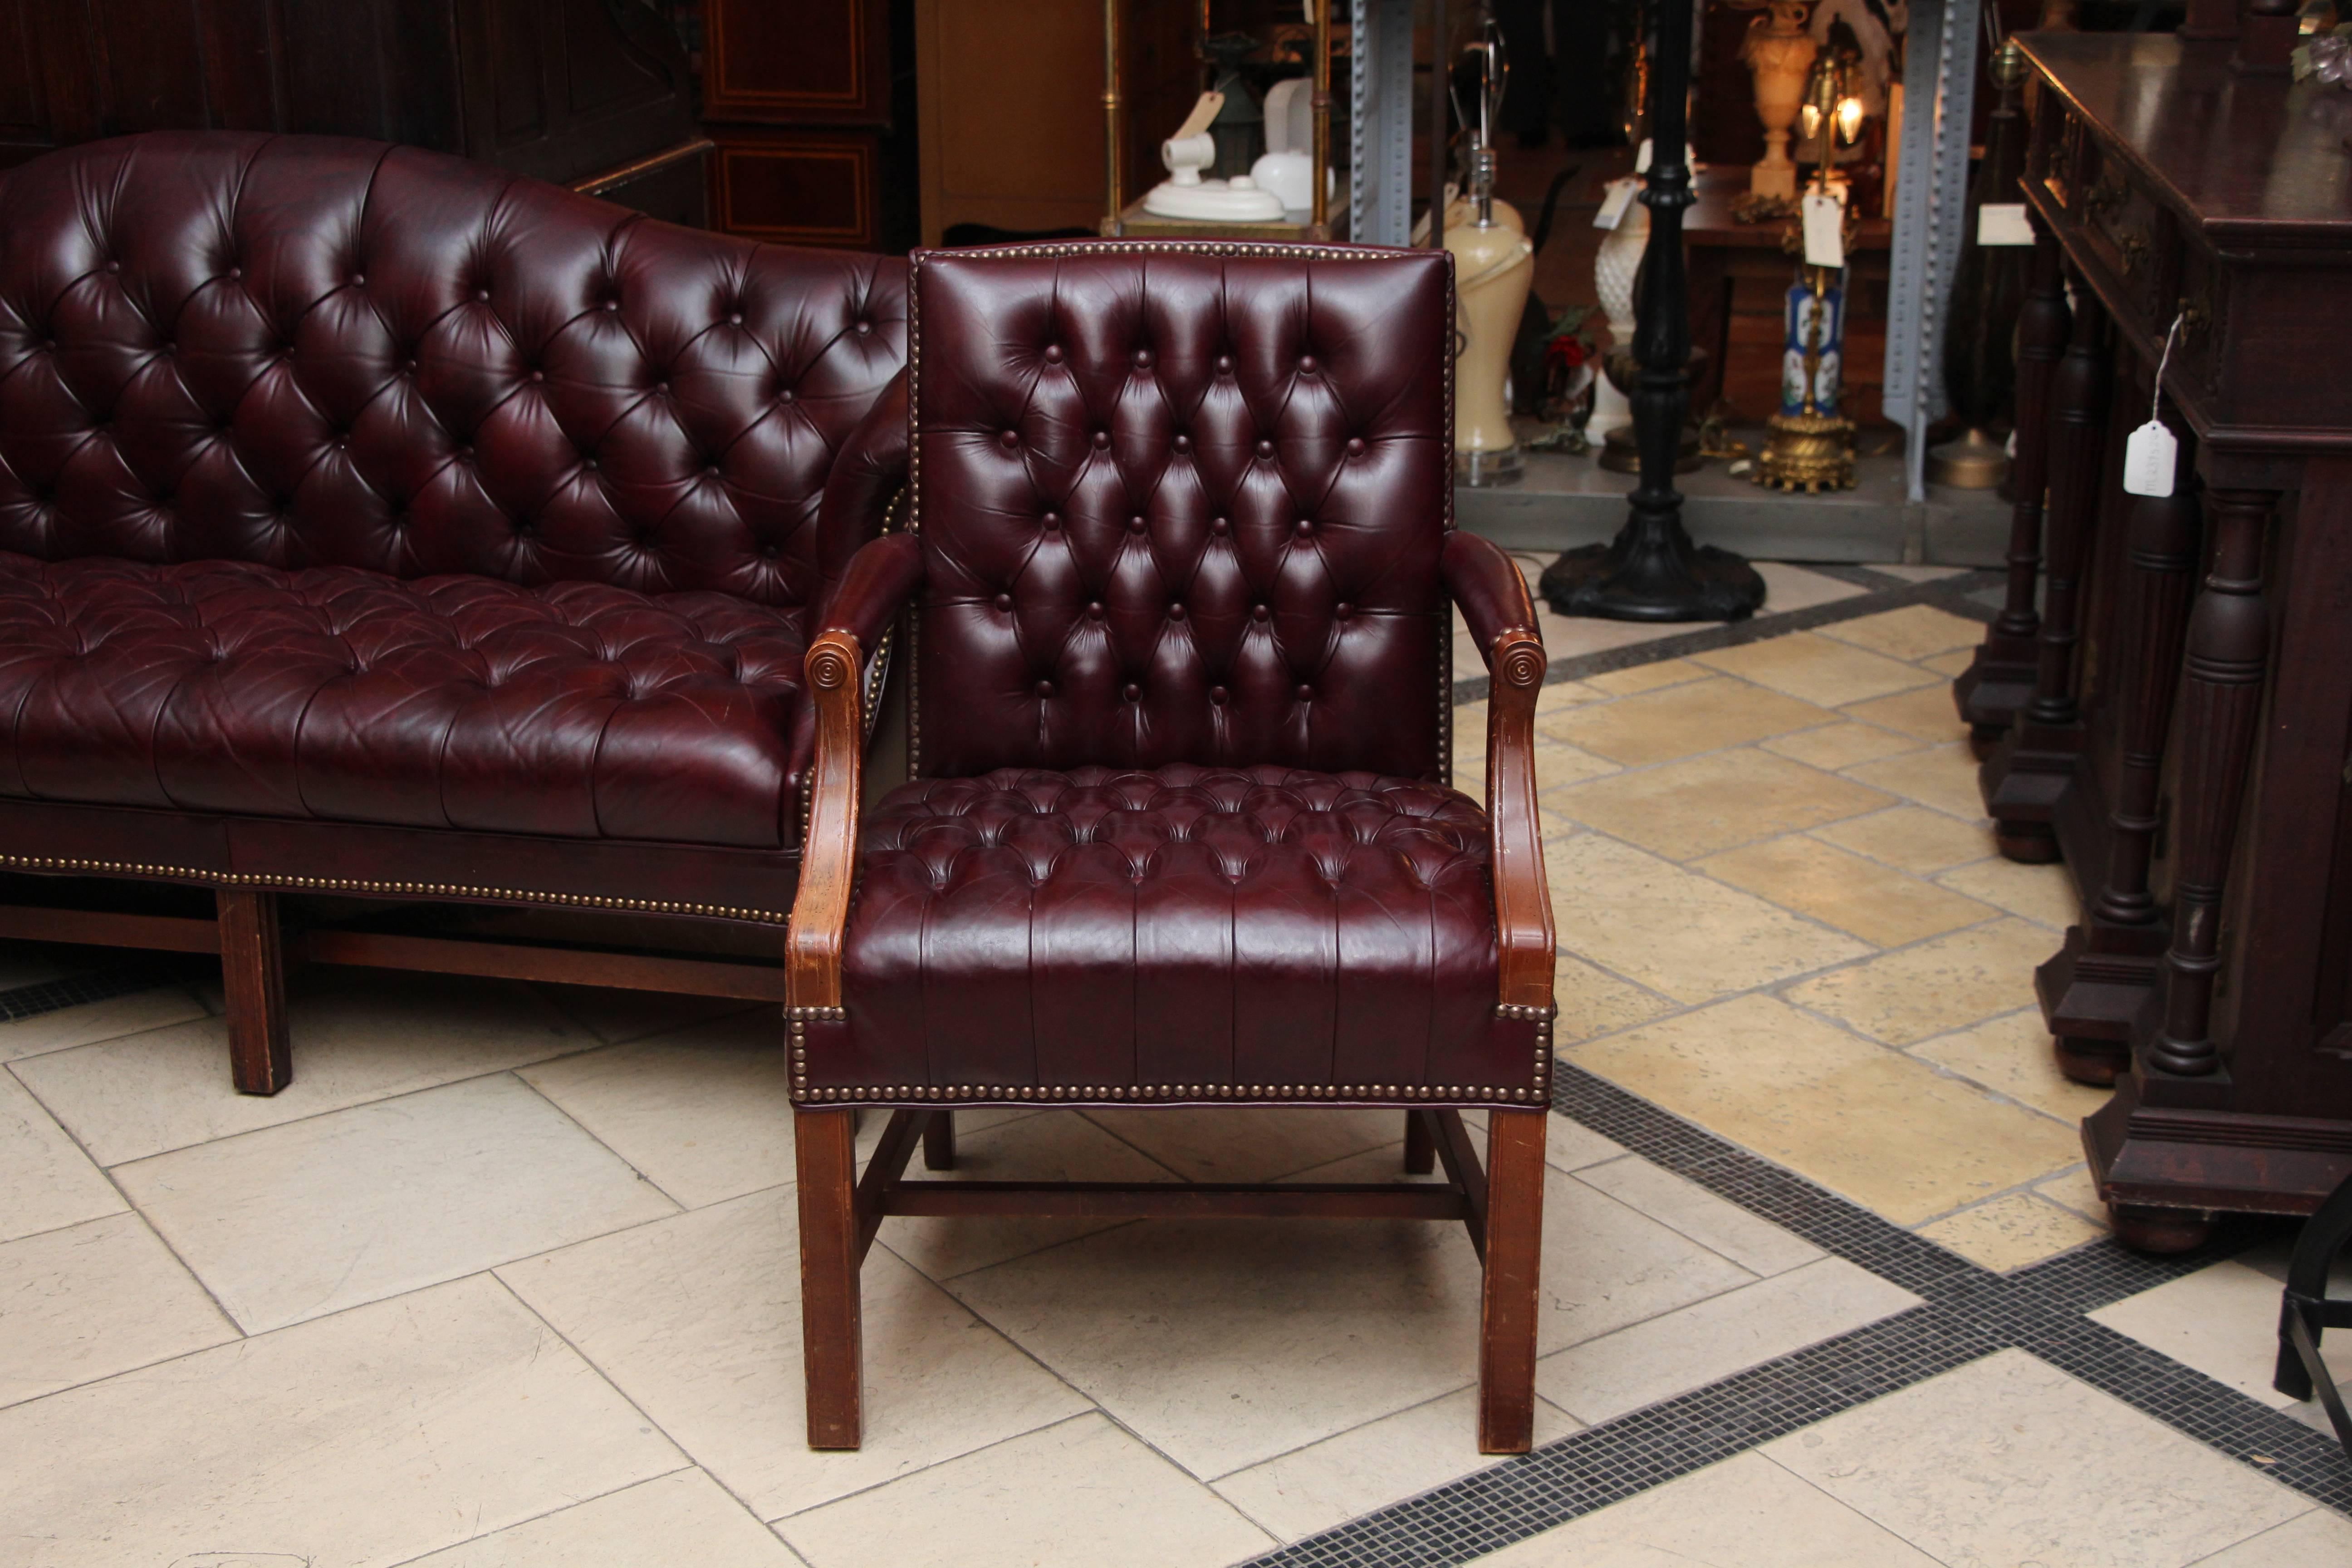 1980s Tufted Burgundy Chesterfield Leather Sofa and Chair Set with Hickory Wood In Excellent Condition In New York, NY